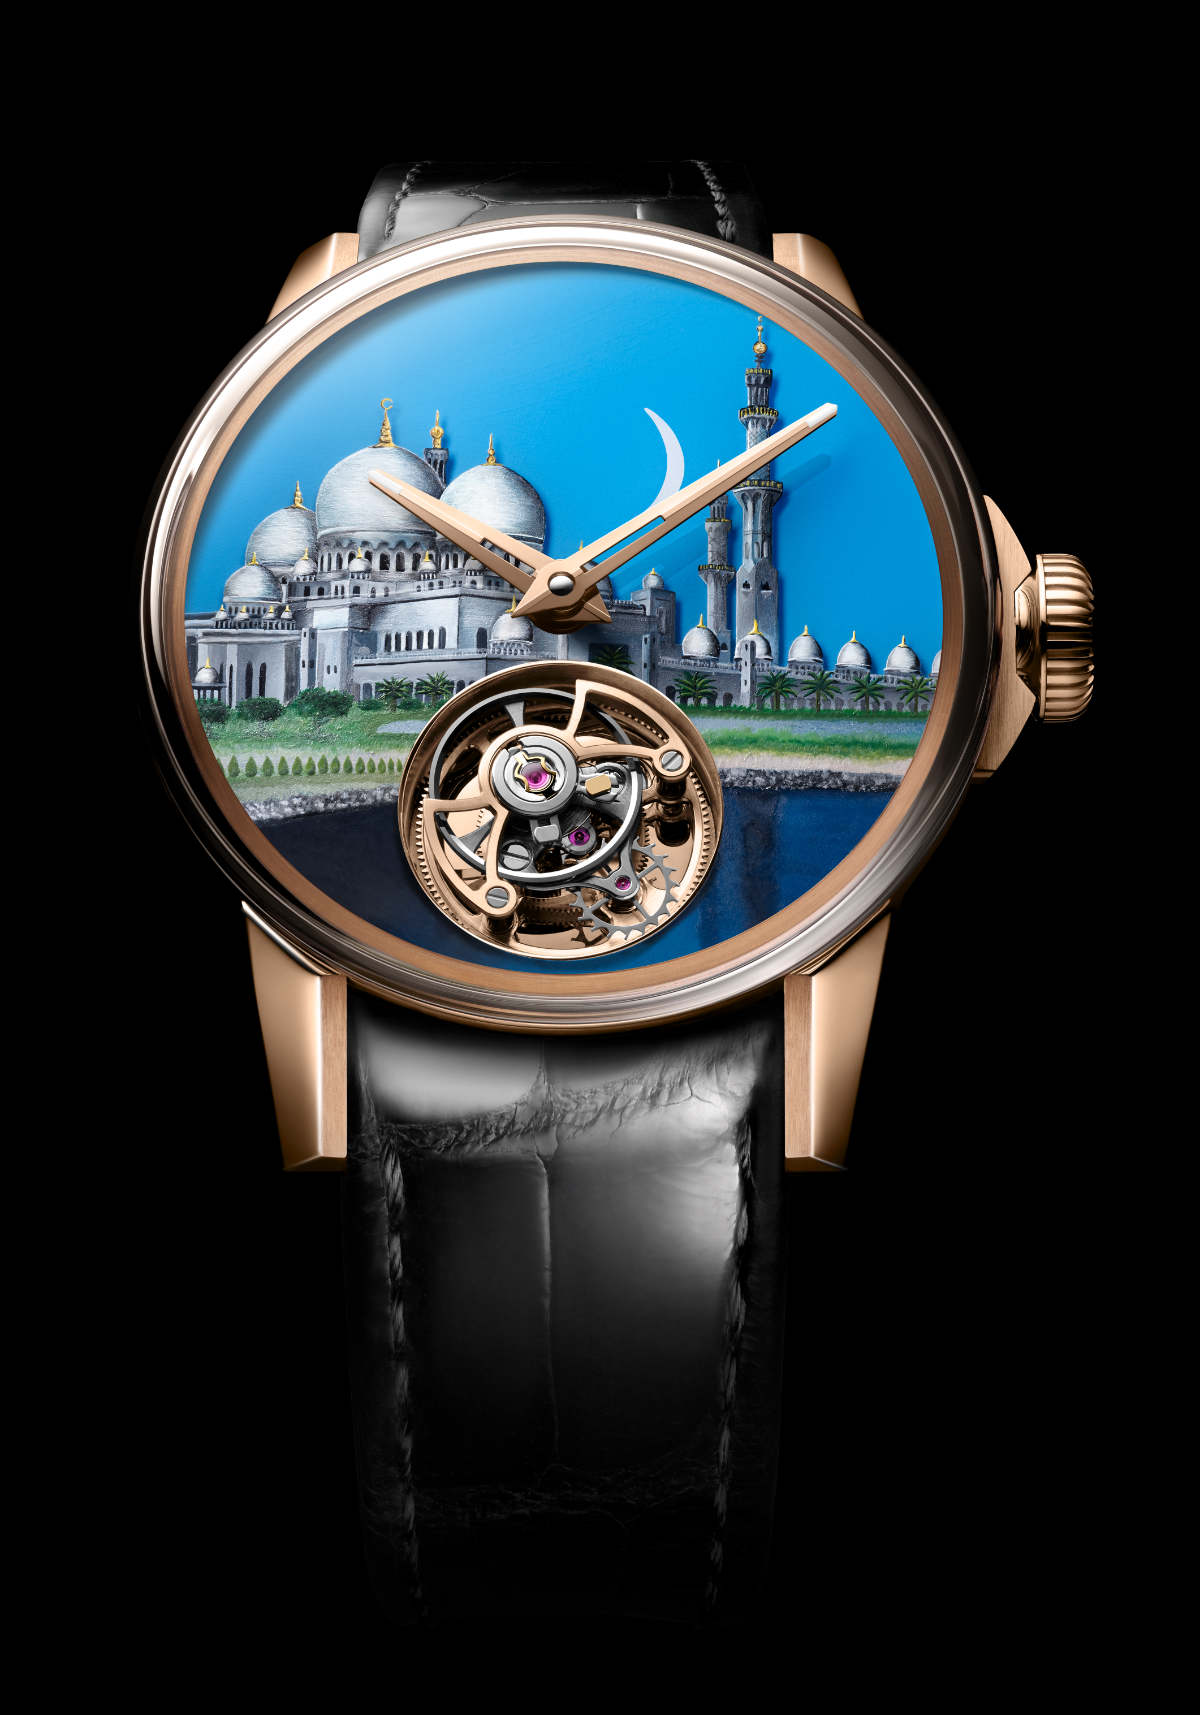 Around The World In Eight Days With Louis Moinet